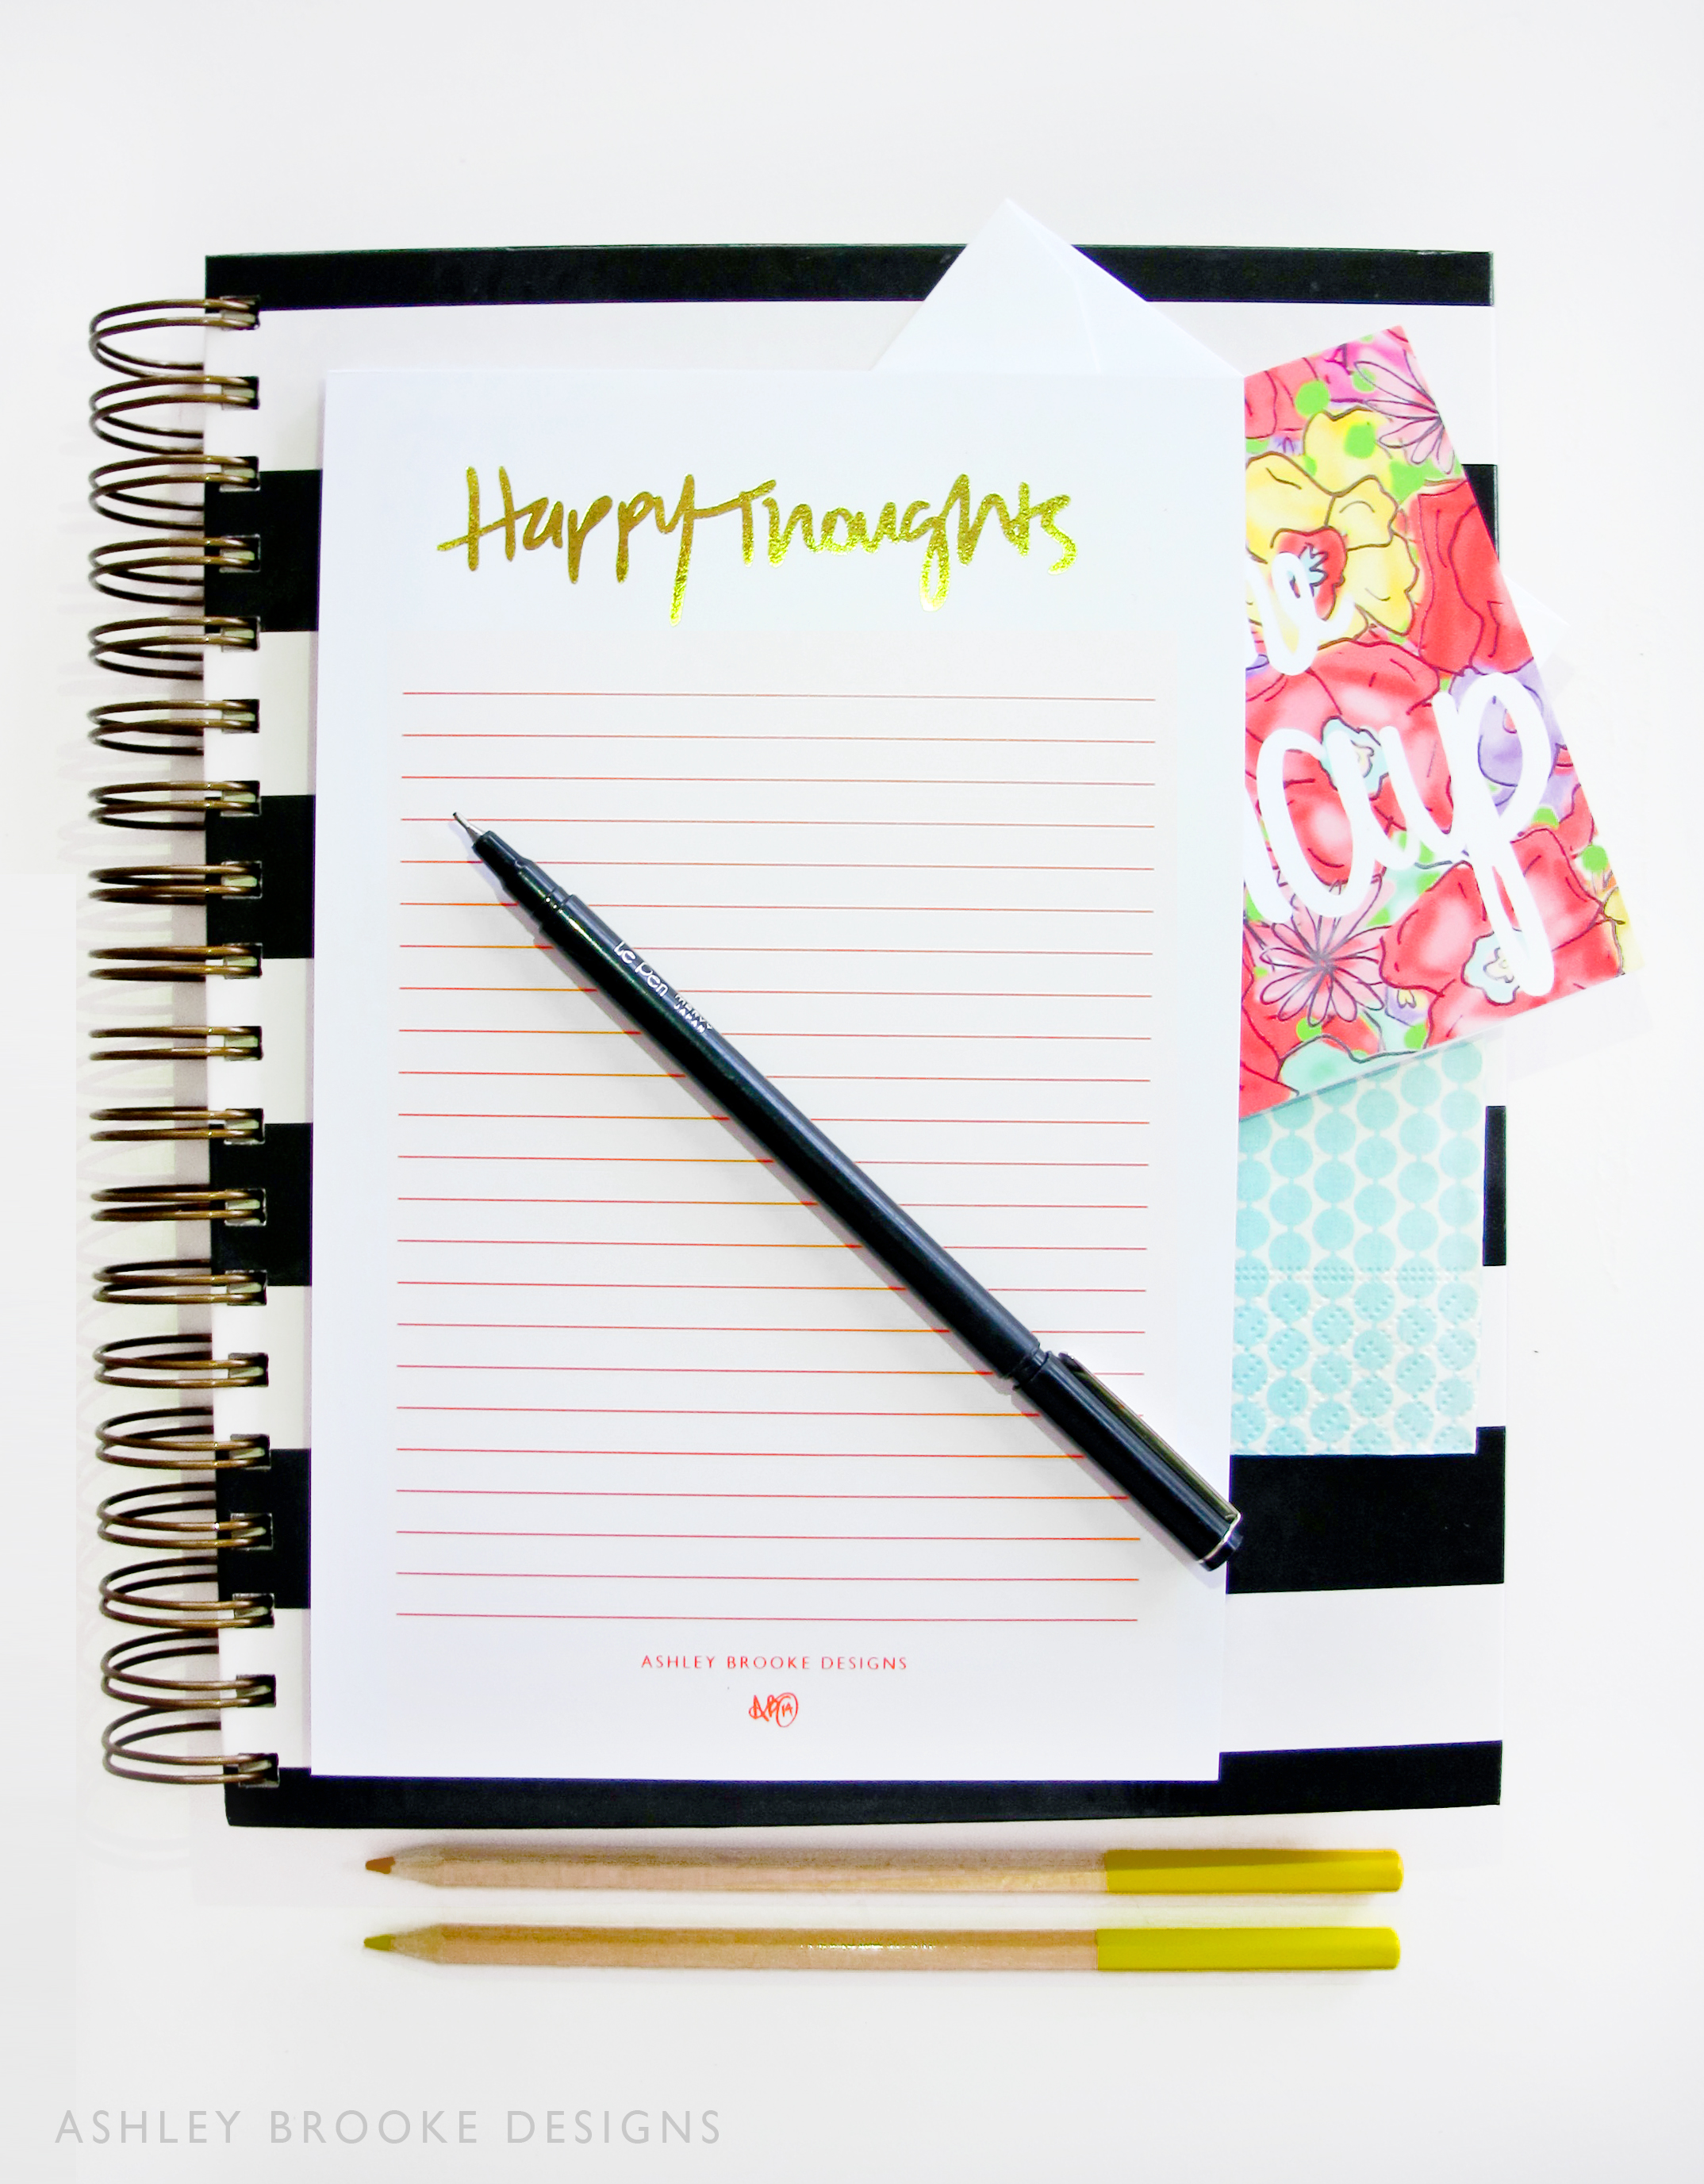 Happy Thoughts Notepad via Ashley Brooke Designs